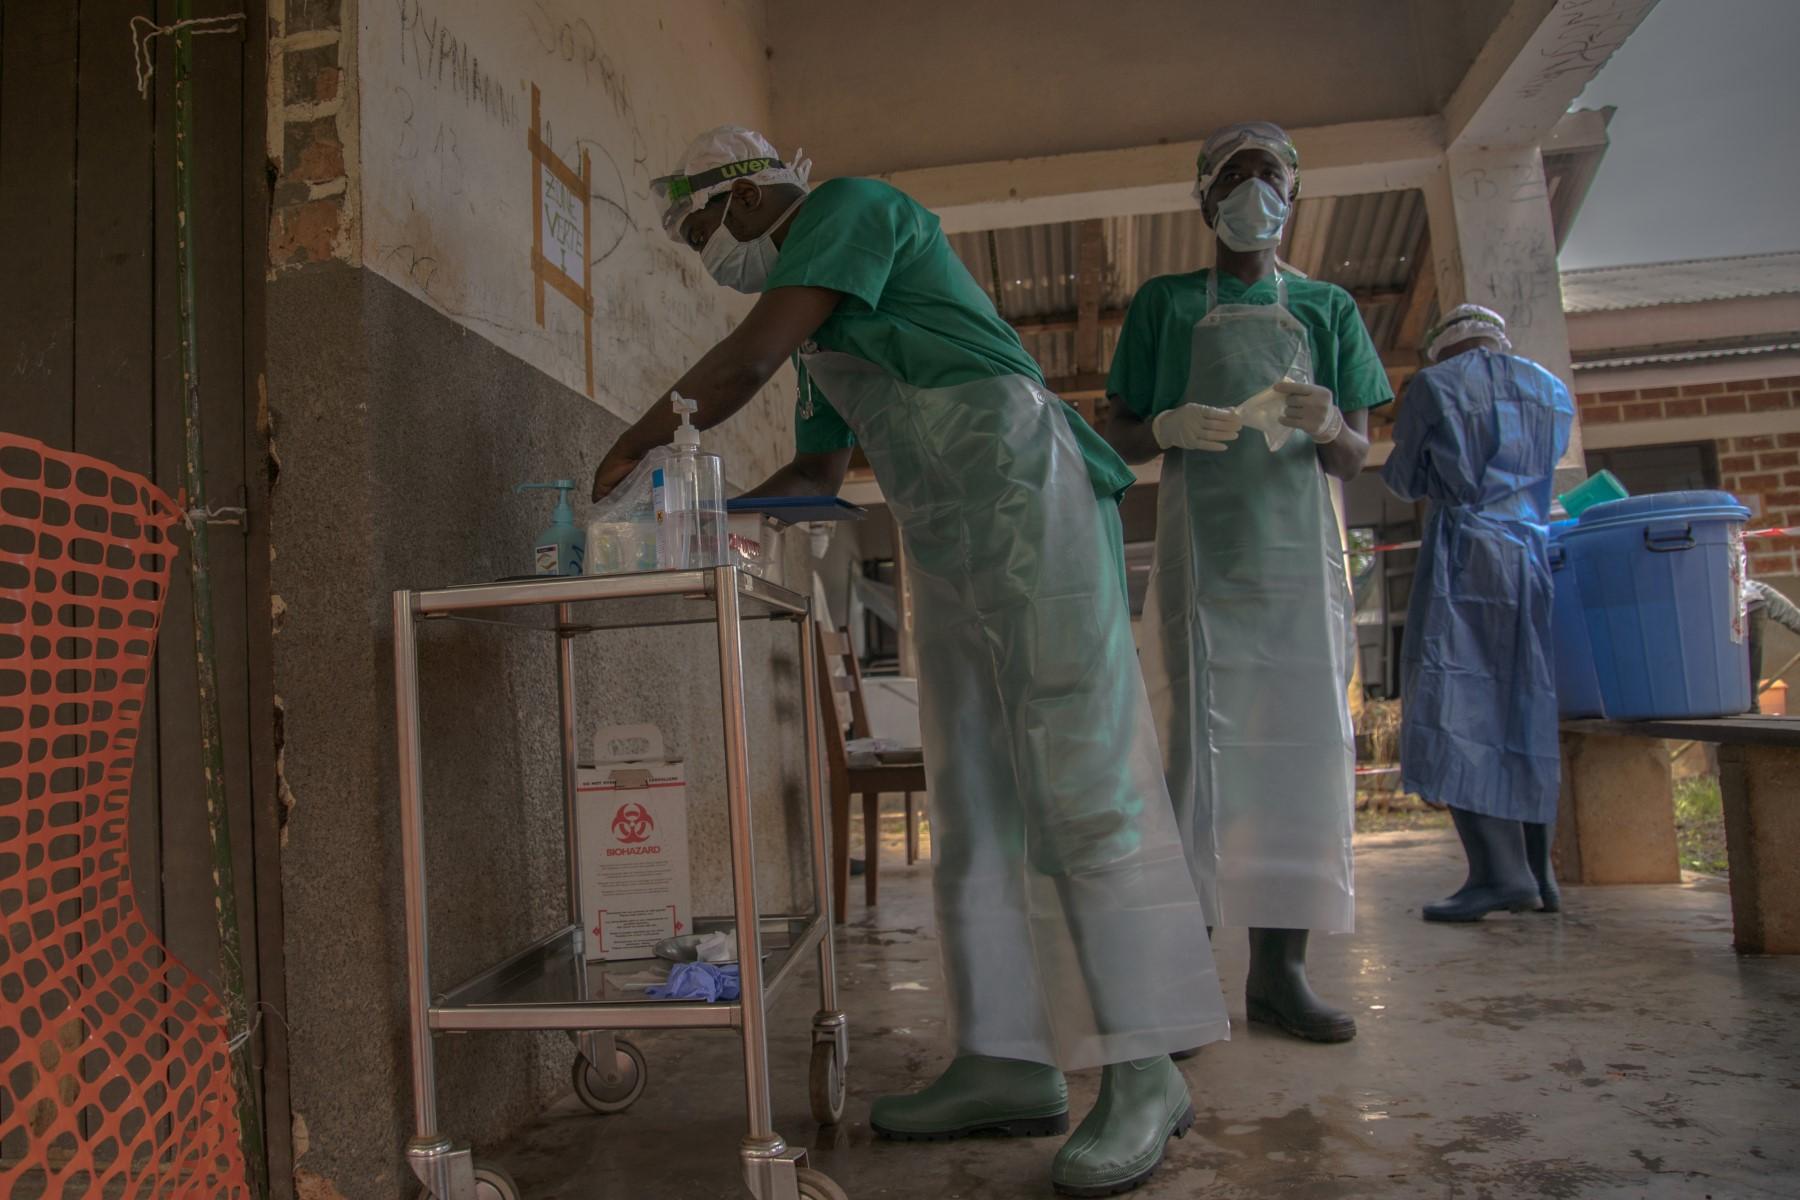 Medical staff wearing protective equipment enter the quarantine area of the centre of NGO Doctors Without Borders, in Zomea Kaka, in the Lobaya region, in the Central African Republic on Oct 18, 2018. Photo: AFP